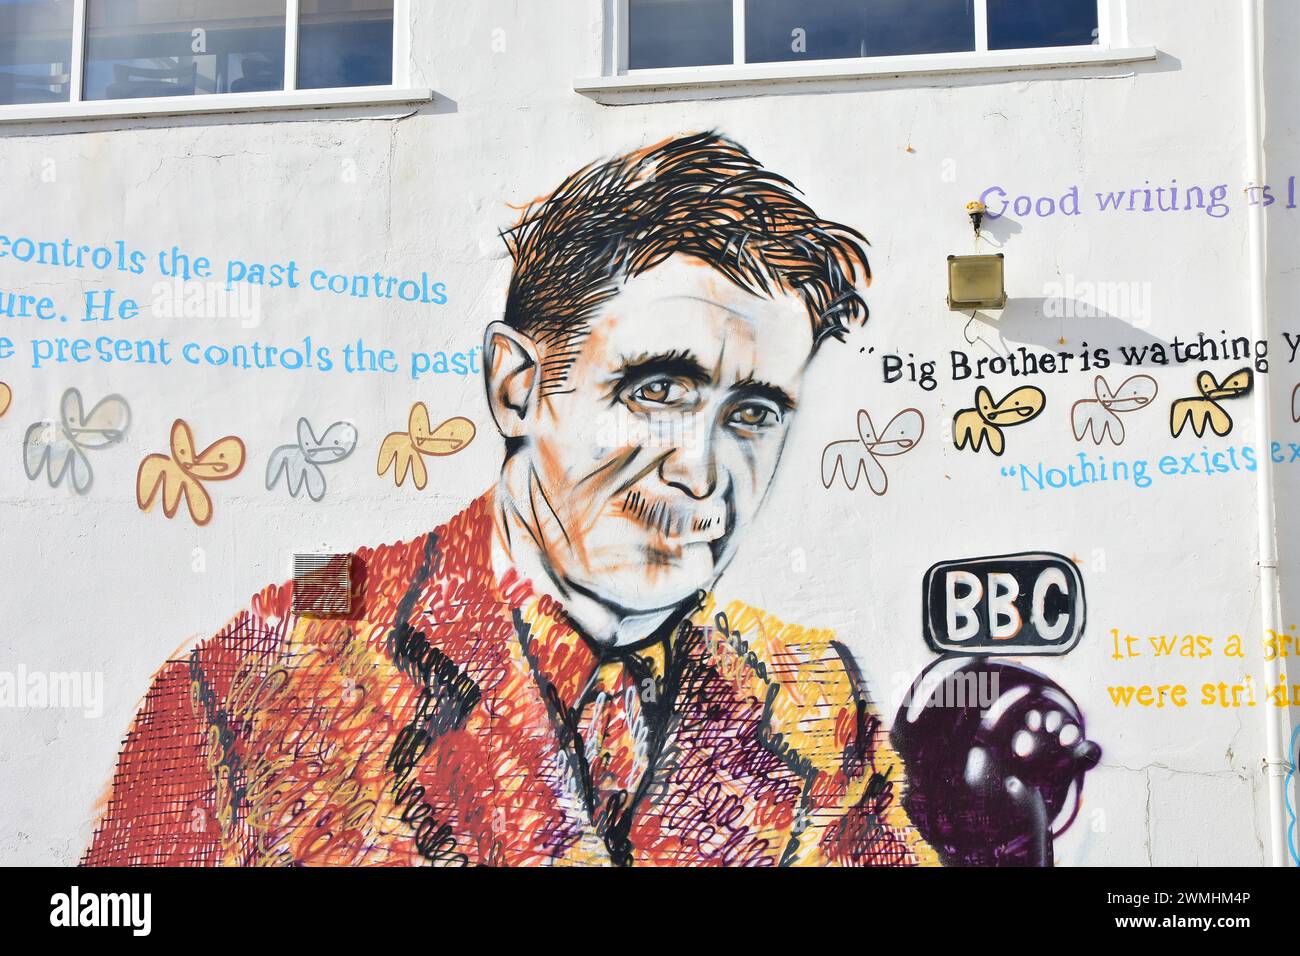 George Orwell at BBC Mural, Southwold Pier, Suffolk, England, UK with Quotes from Classic Books 1984 and Animal Farm Stock Photo